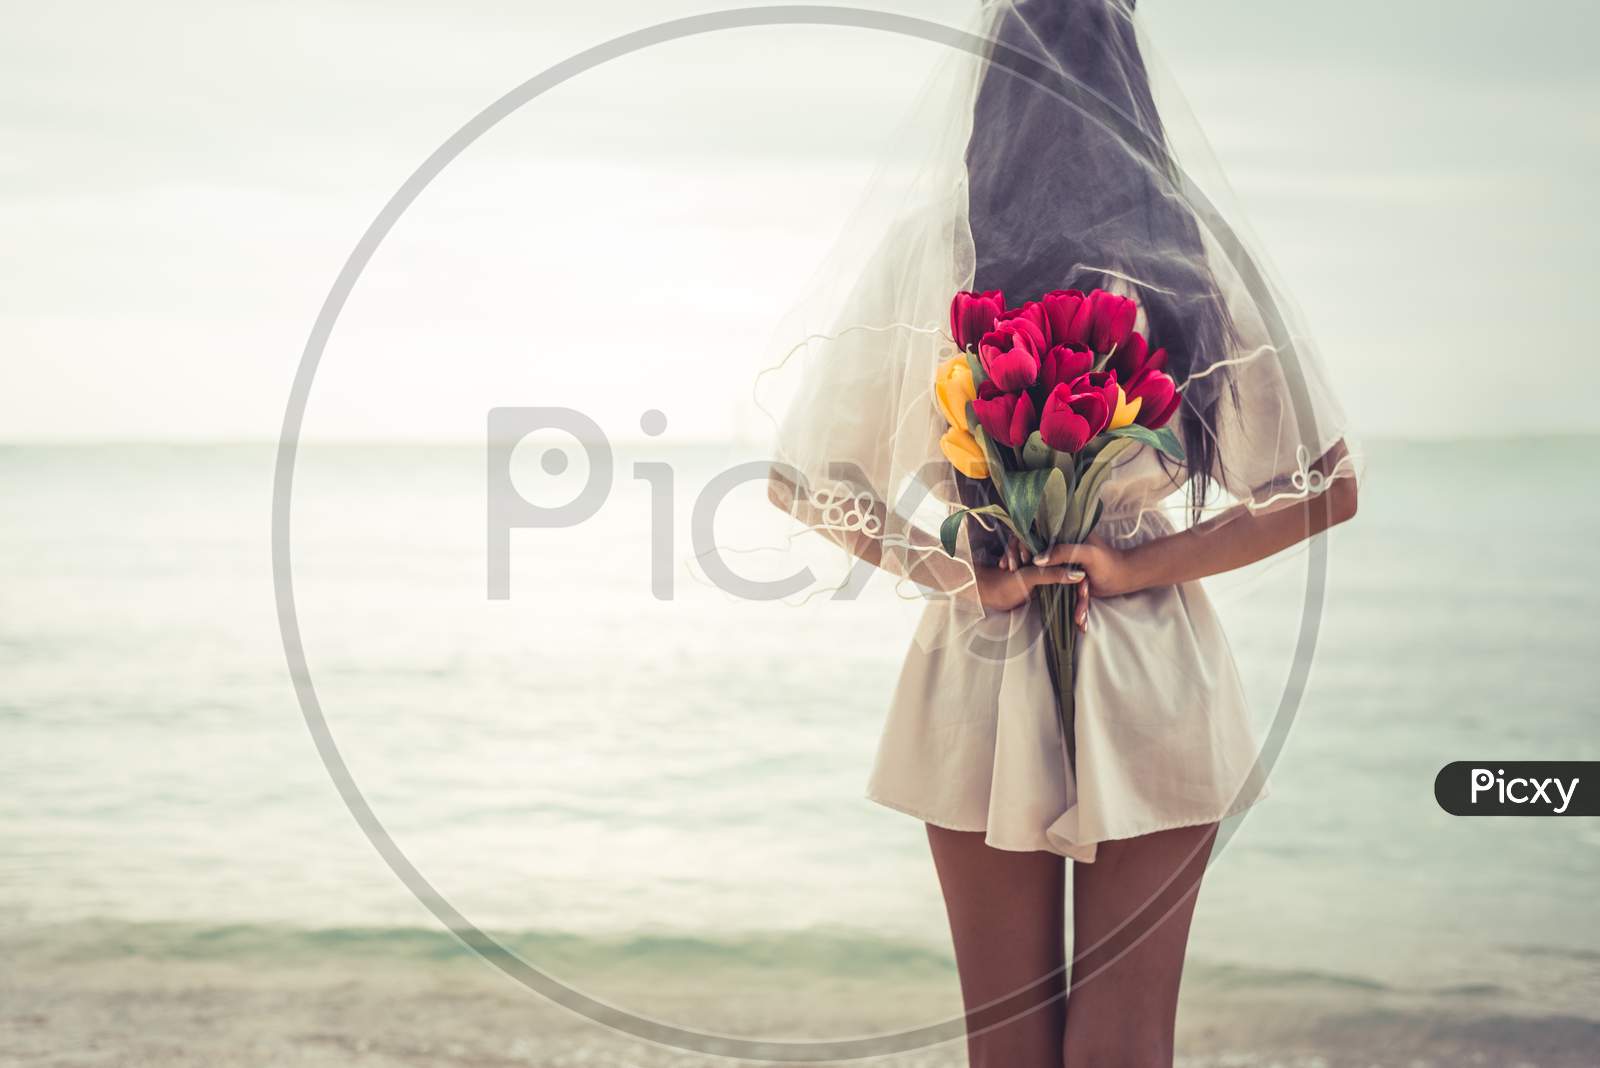 Asian Woman Holding Flowers In Behind And Waiting For Someone Make Her Happy. Lonely And Single Woman Concept. Sadness And Soulmate Concept. Dark Ton Film Filter. Heart Broken And Wedding Theme.